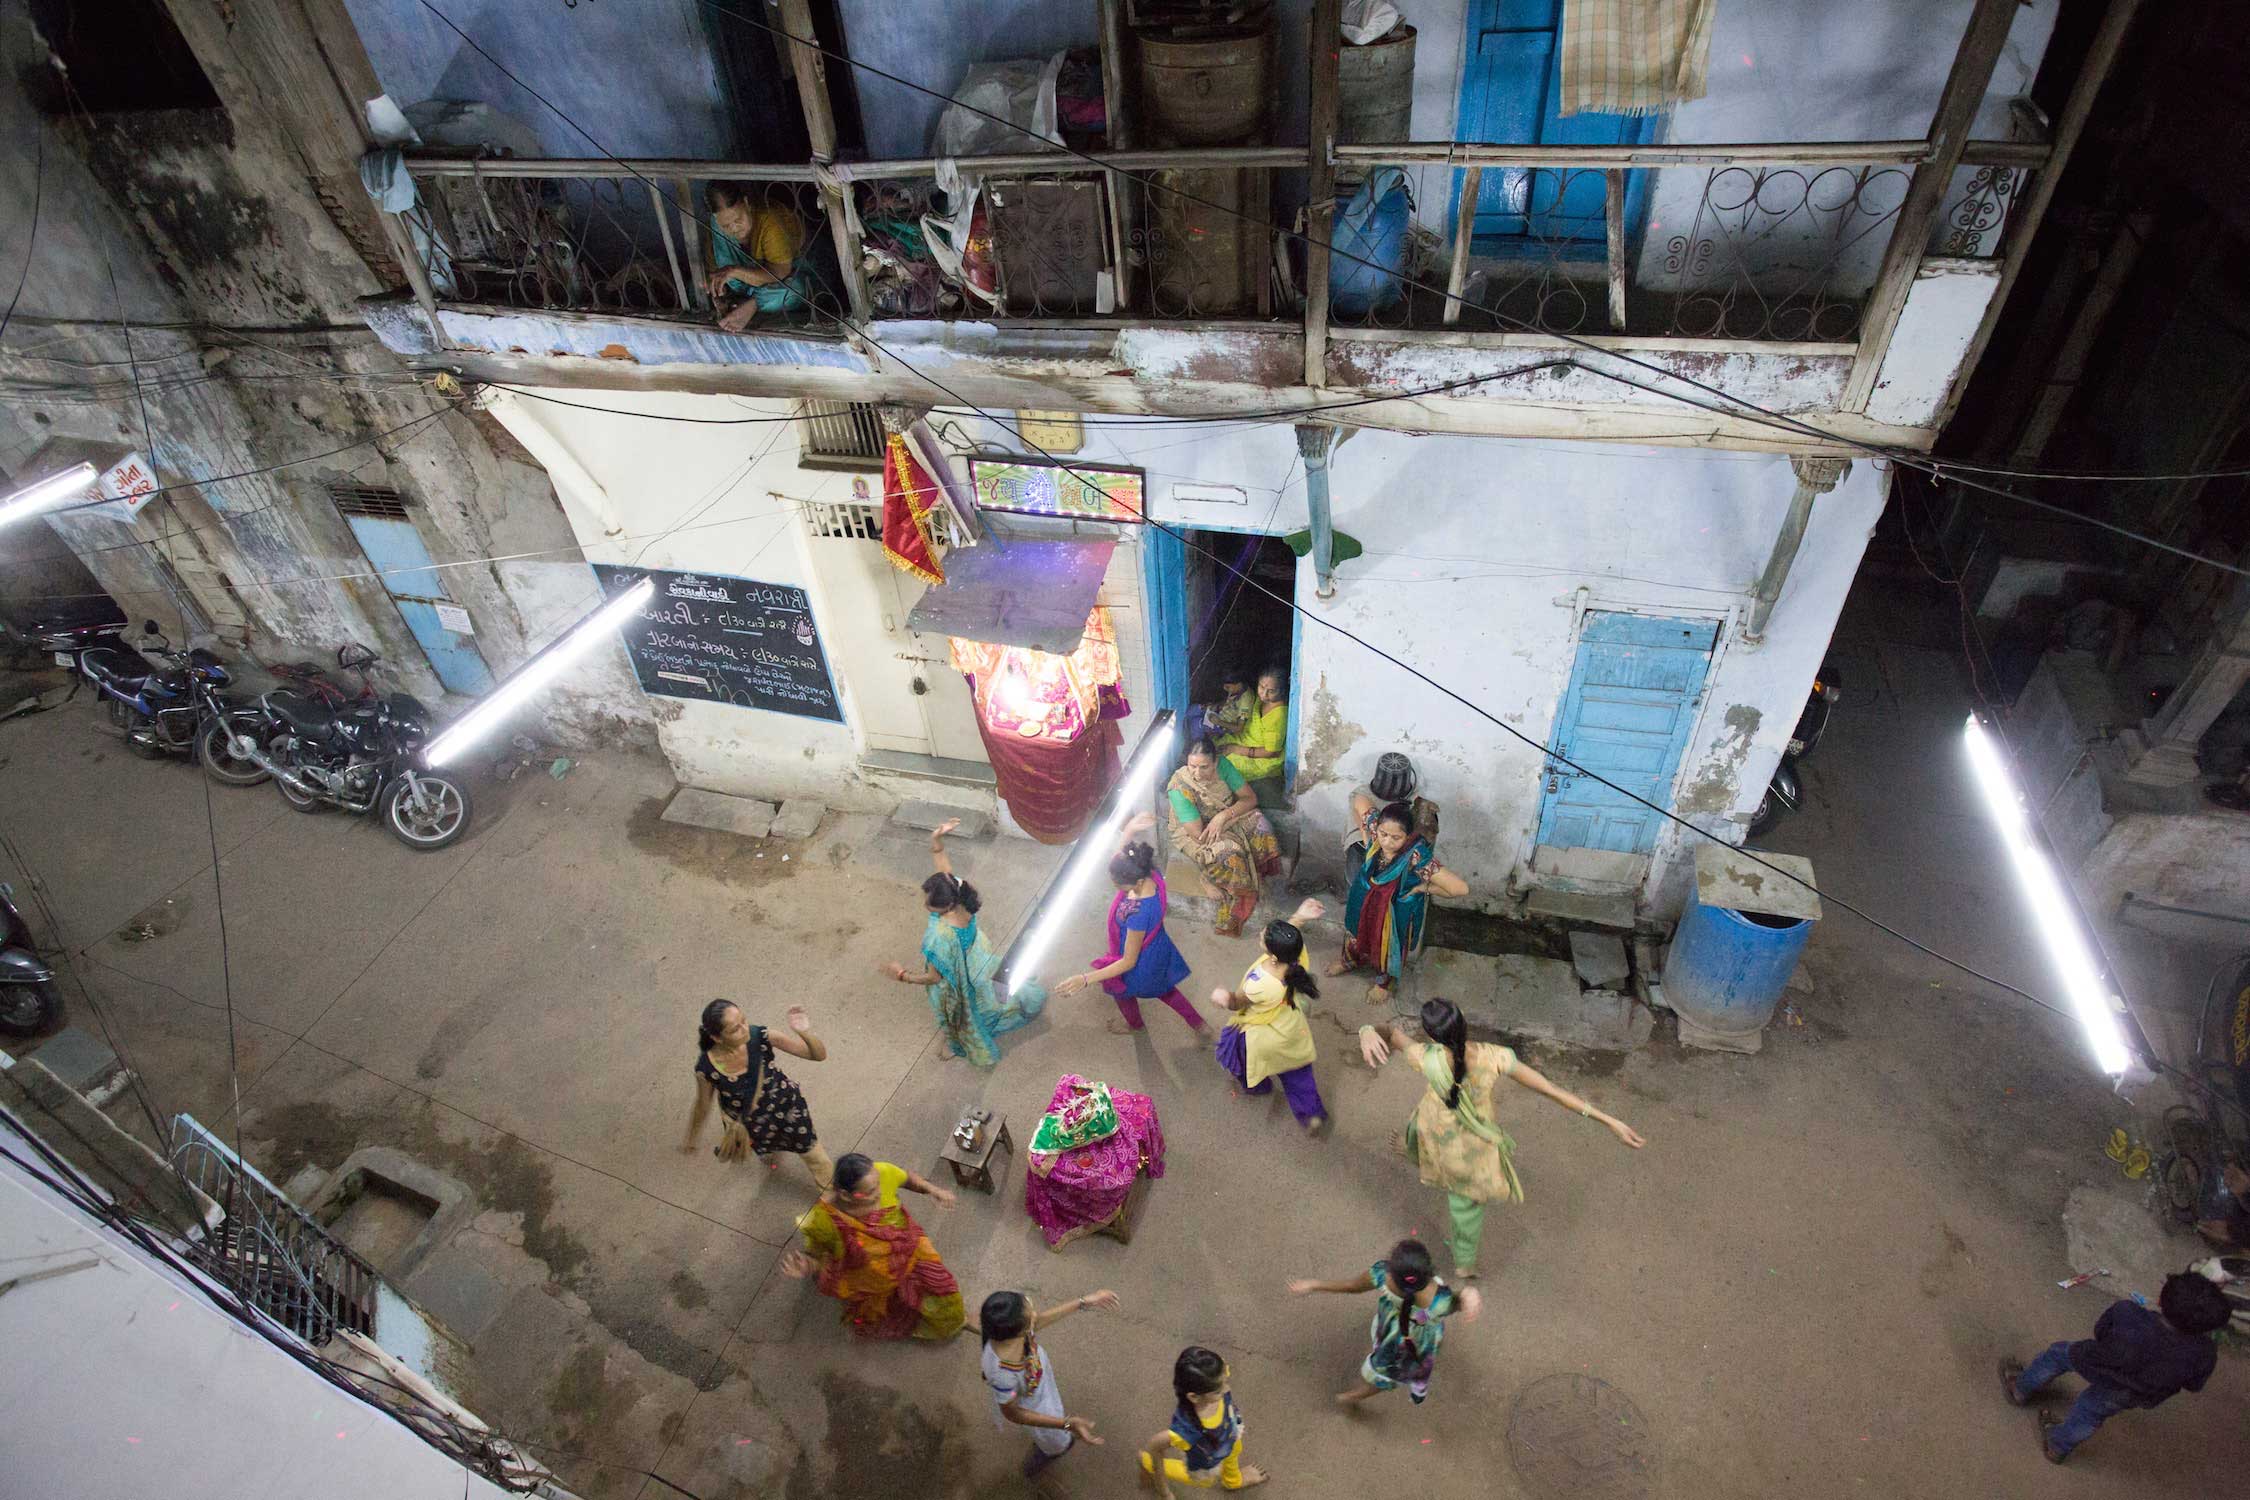 Old part of town in the capital of Gujarats. A family dances around the mother goddess figure and fire. Grandmothers watch the dance from the balcony and from inside.